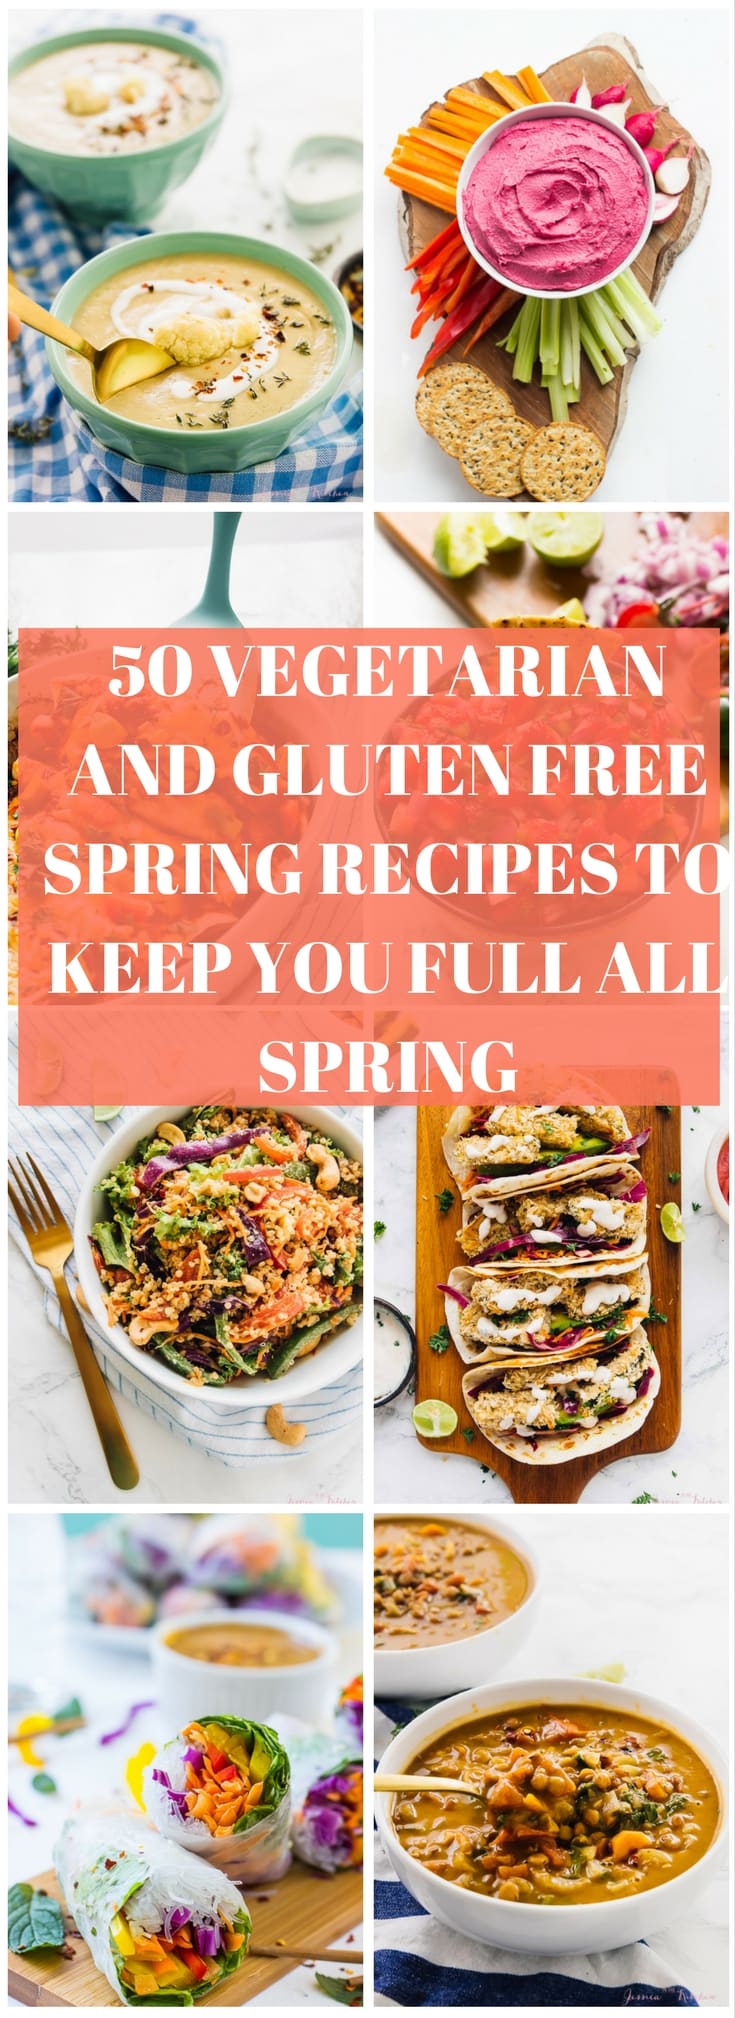 A montage of vegetable and gluten free dishes with text over it.